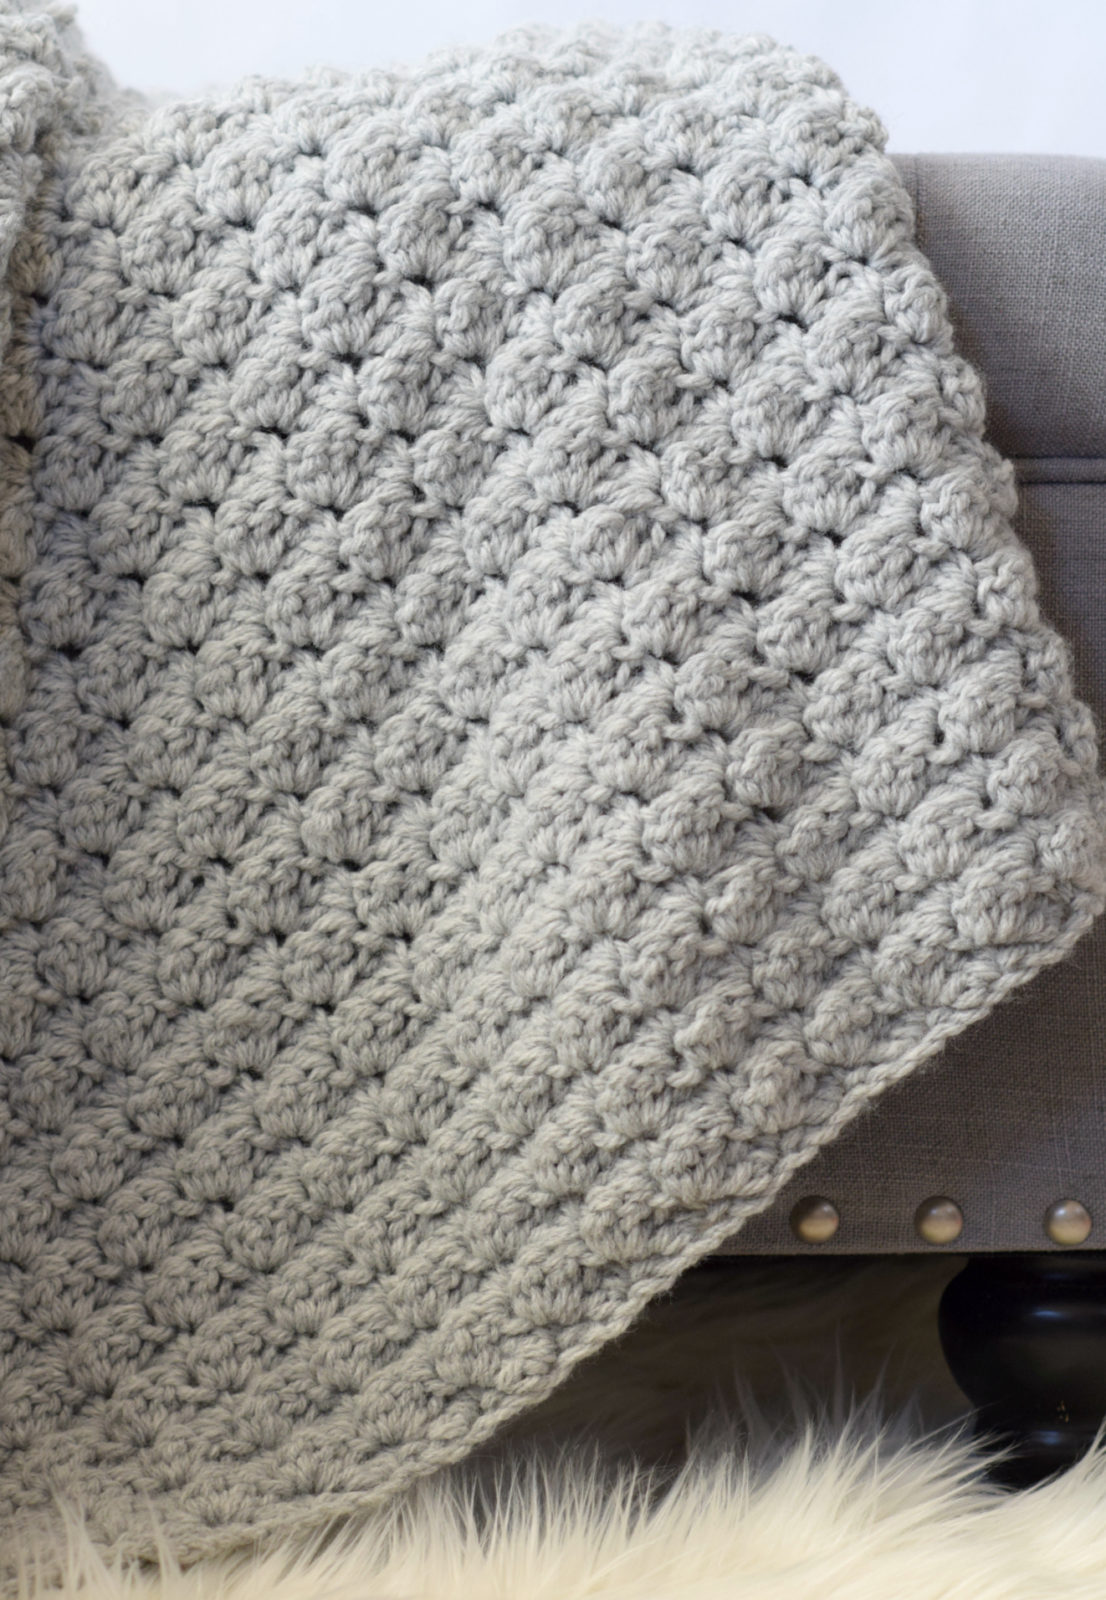 5 Easy and Quick Written Crochet Blanket Patterns for Beginners